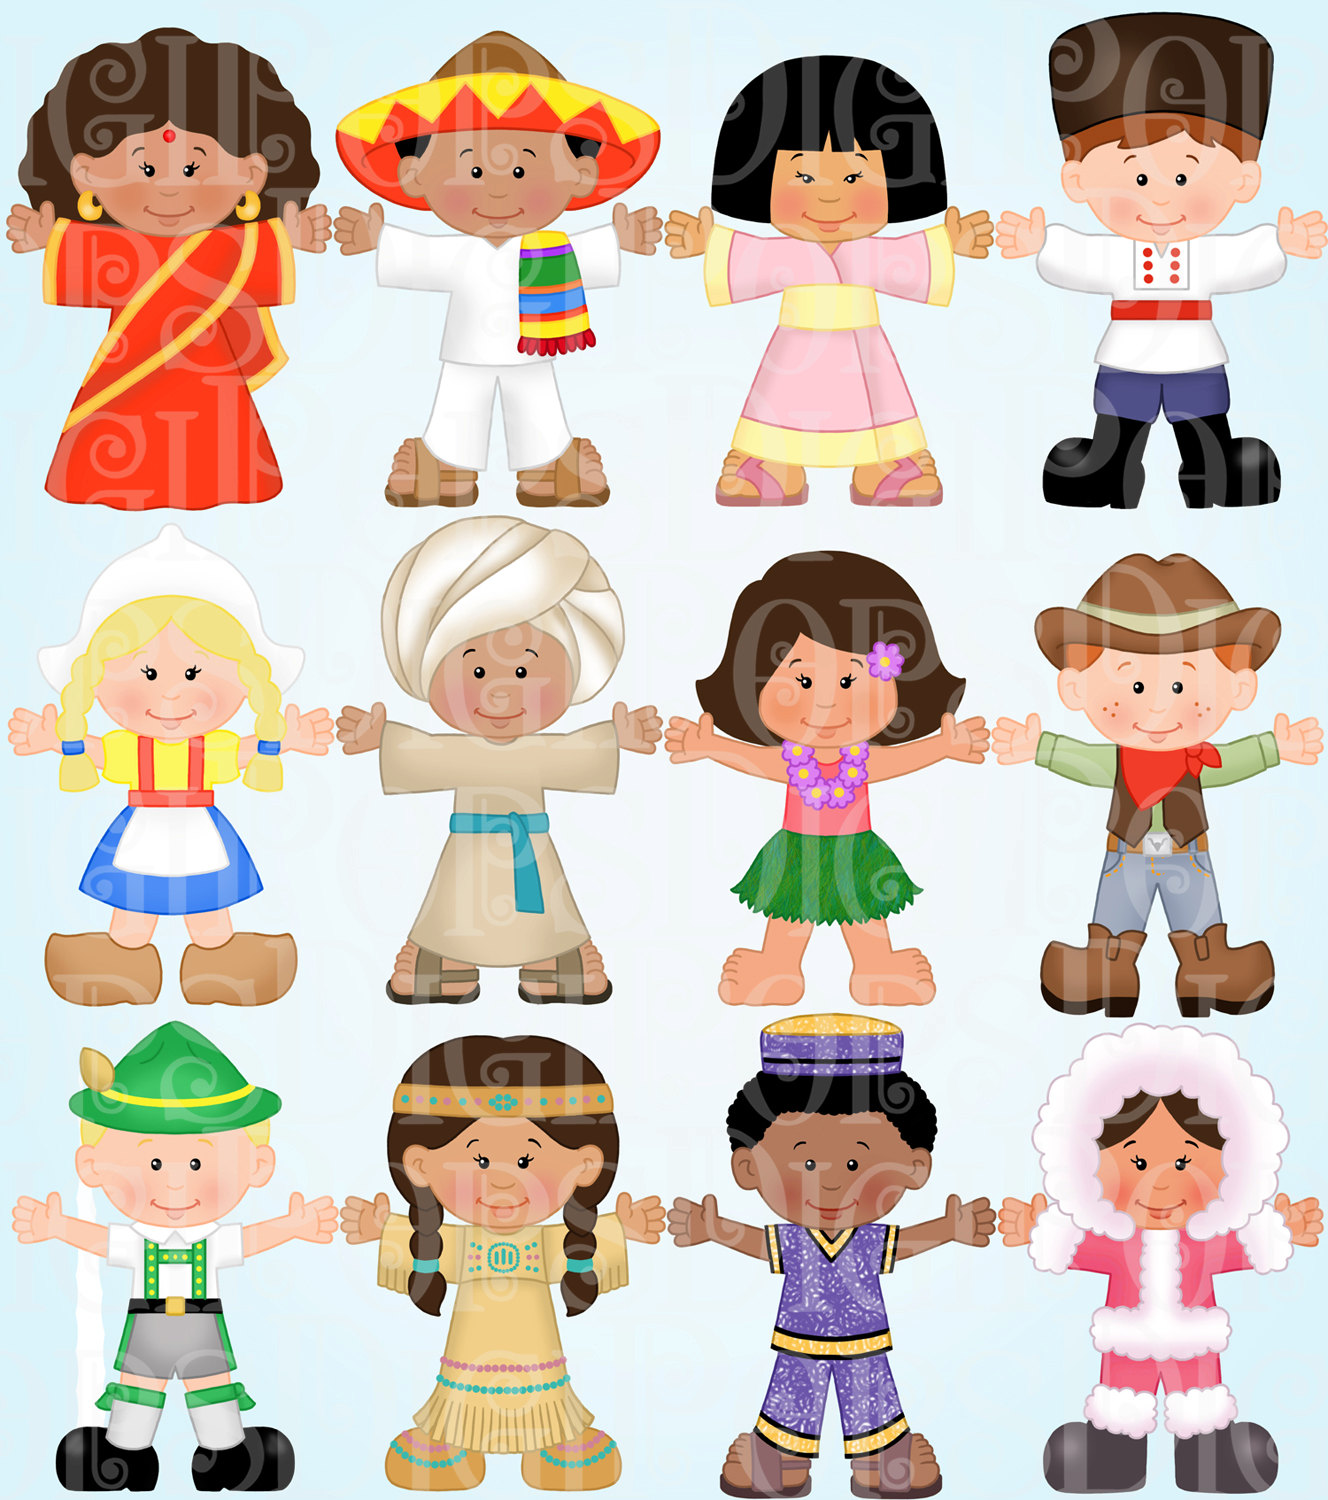 Childrens clipart collection full download.